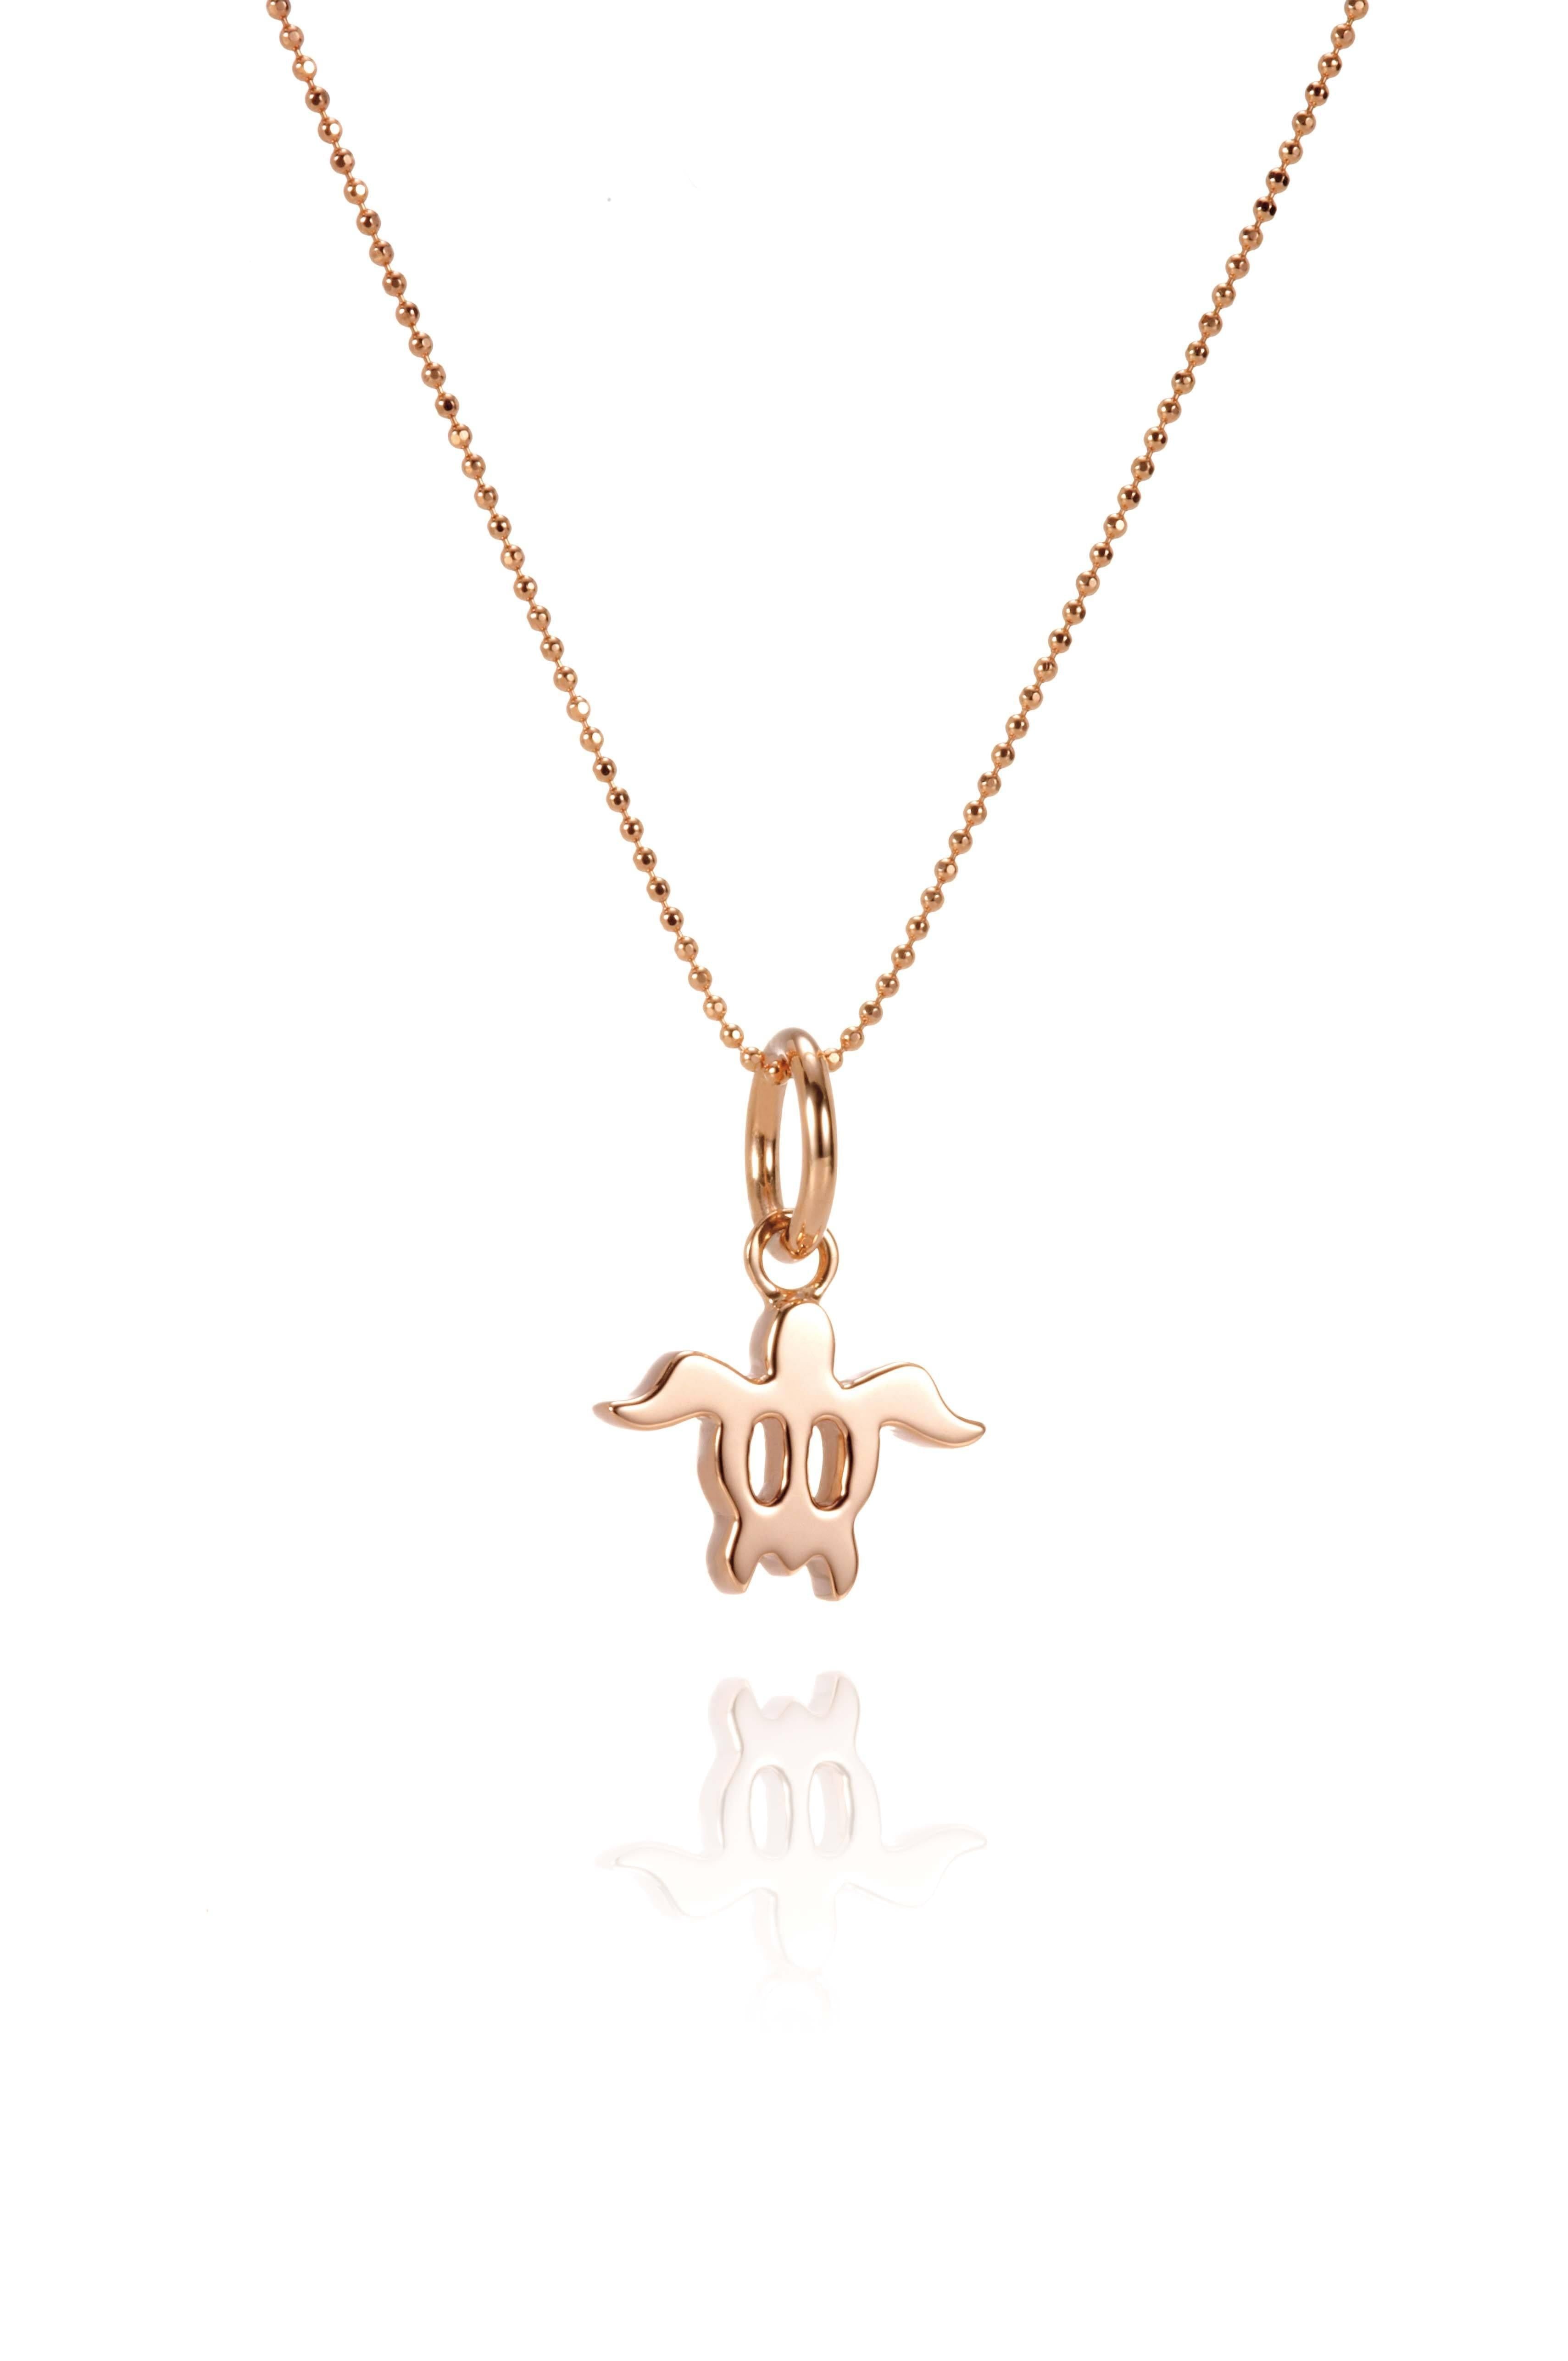 The picture shows a 14K rose gold sea turtle pendant.